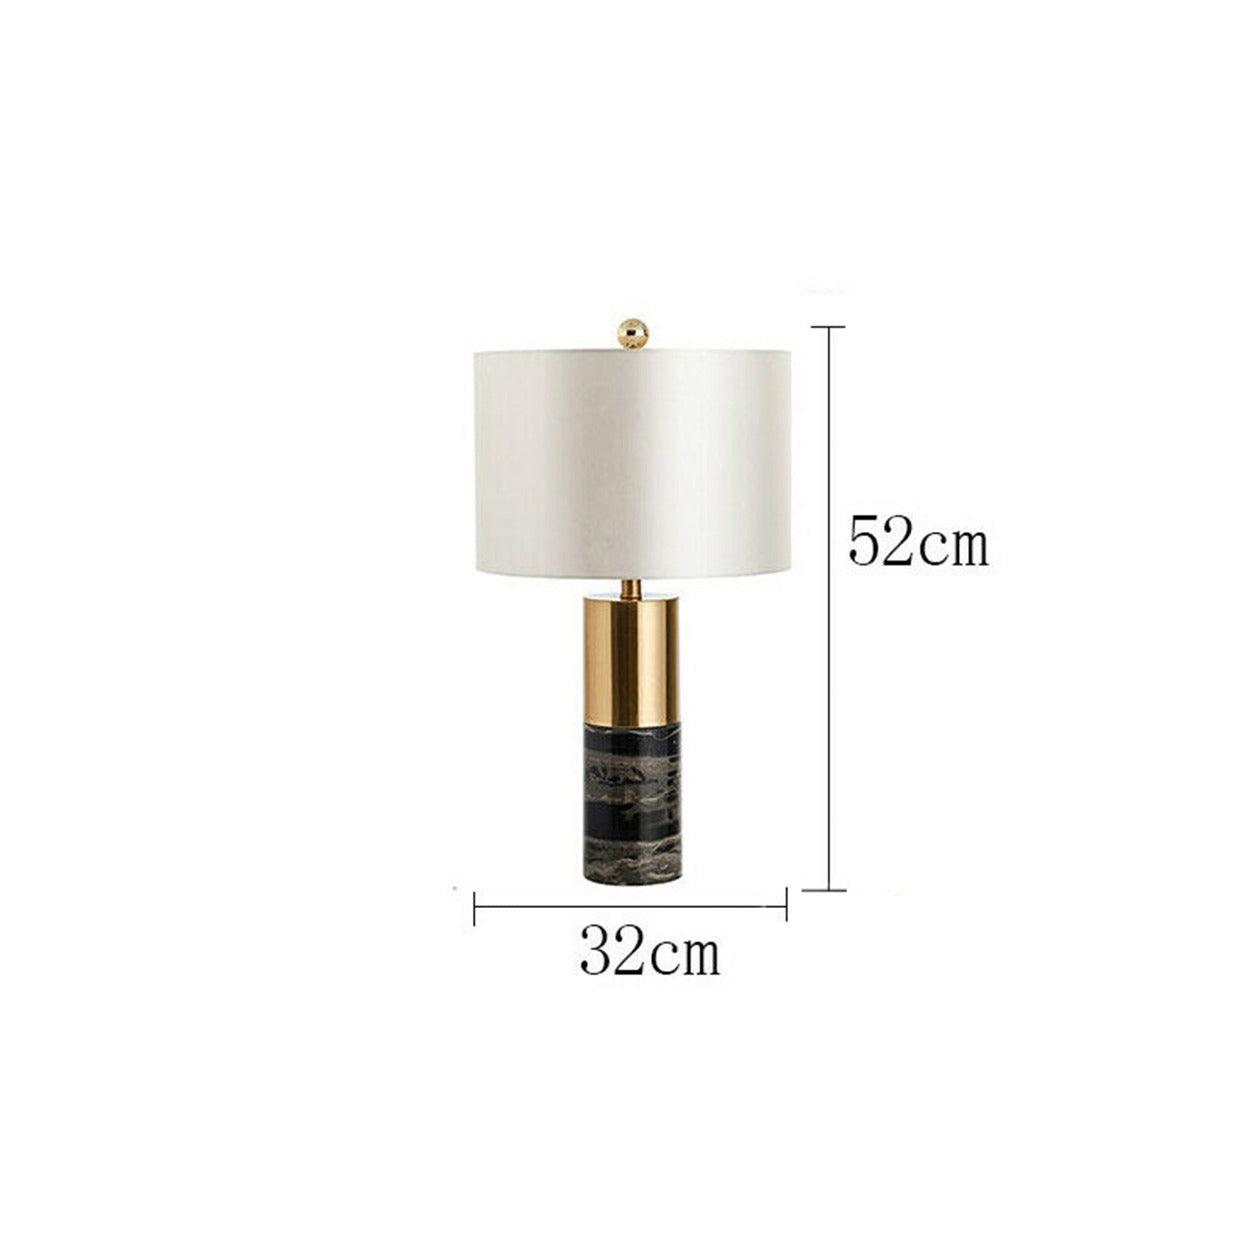 GOLD WITH MARBLE TEXTURE TABLE LAMP - Ankur Lighting